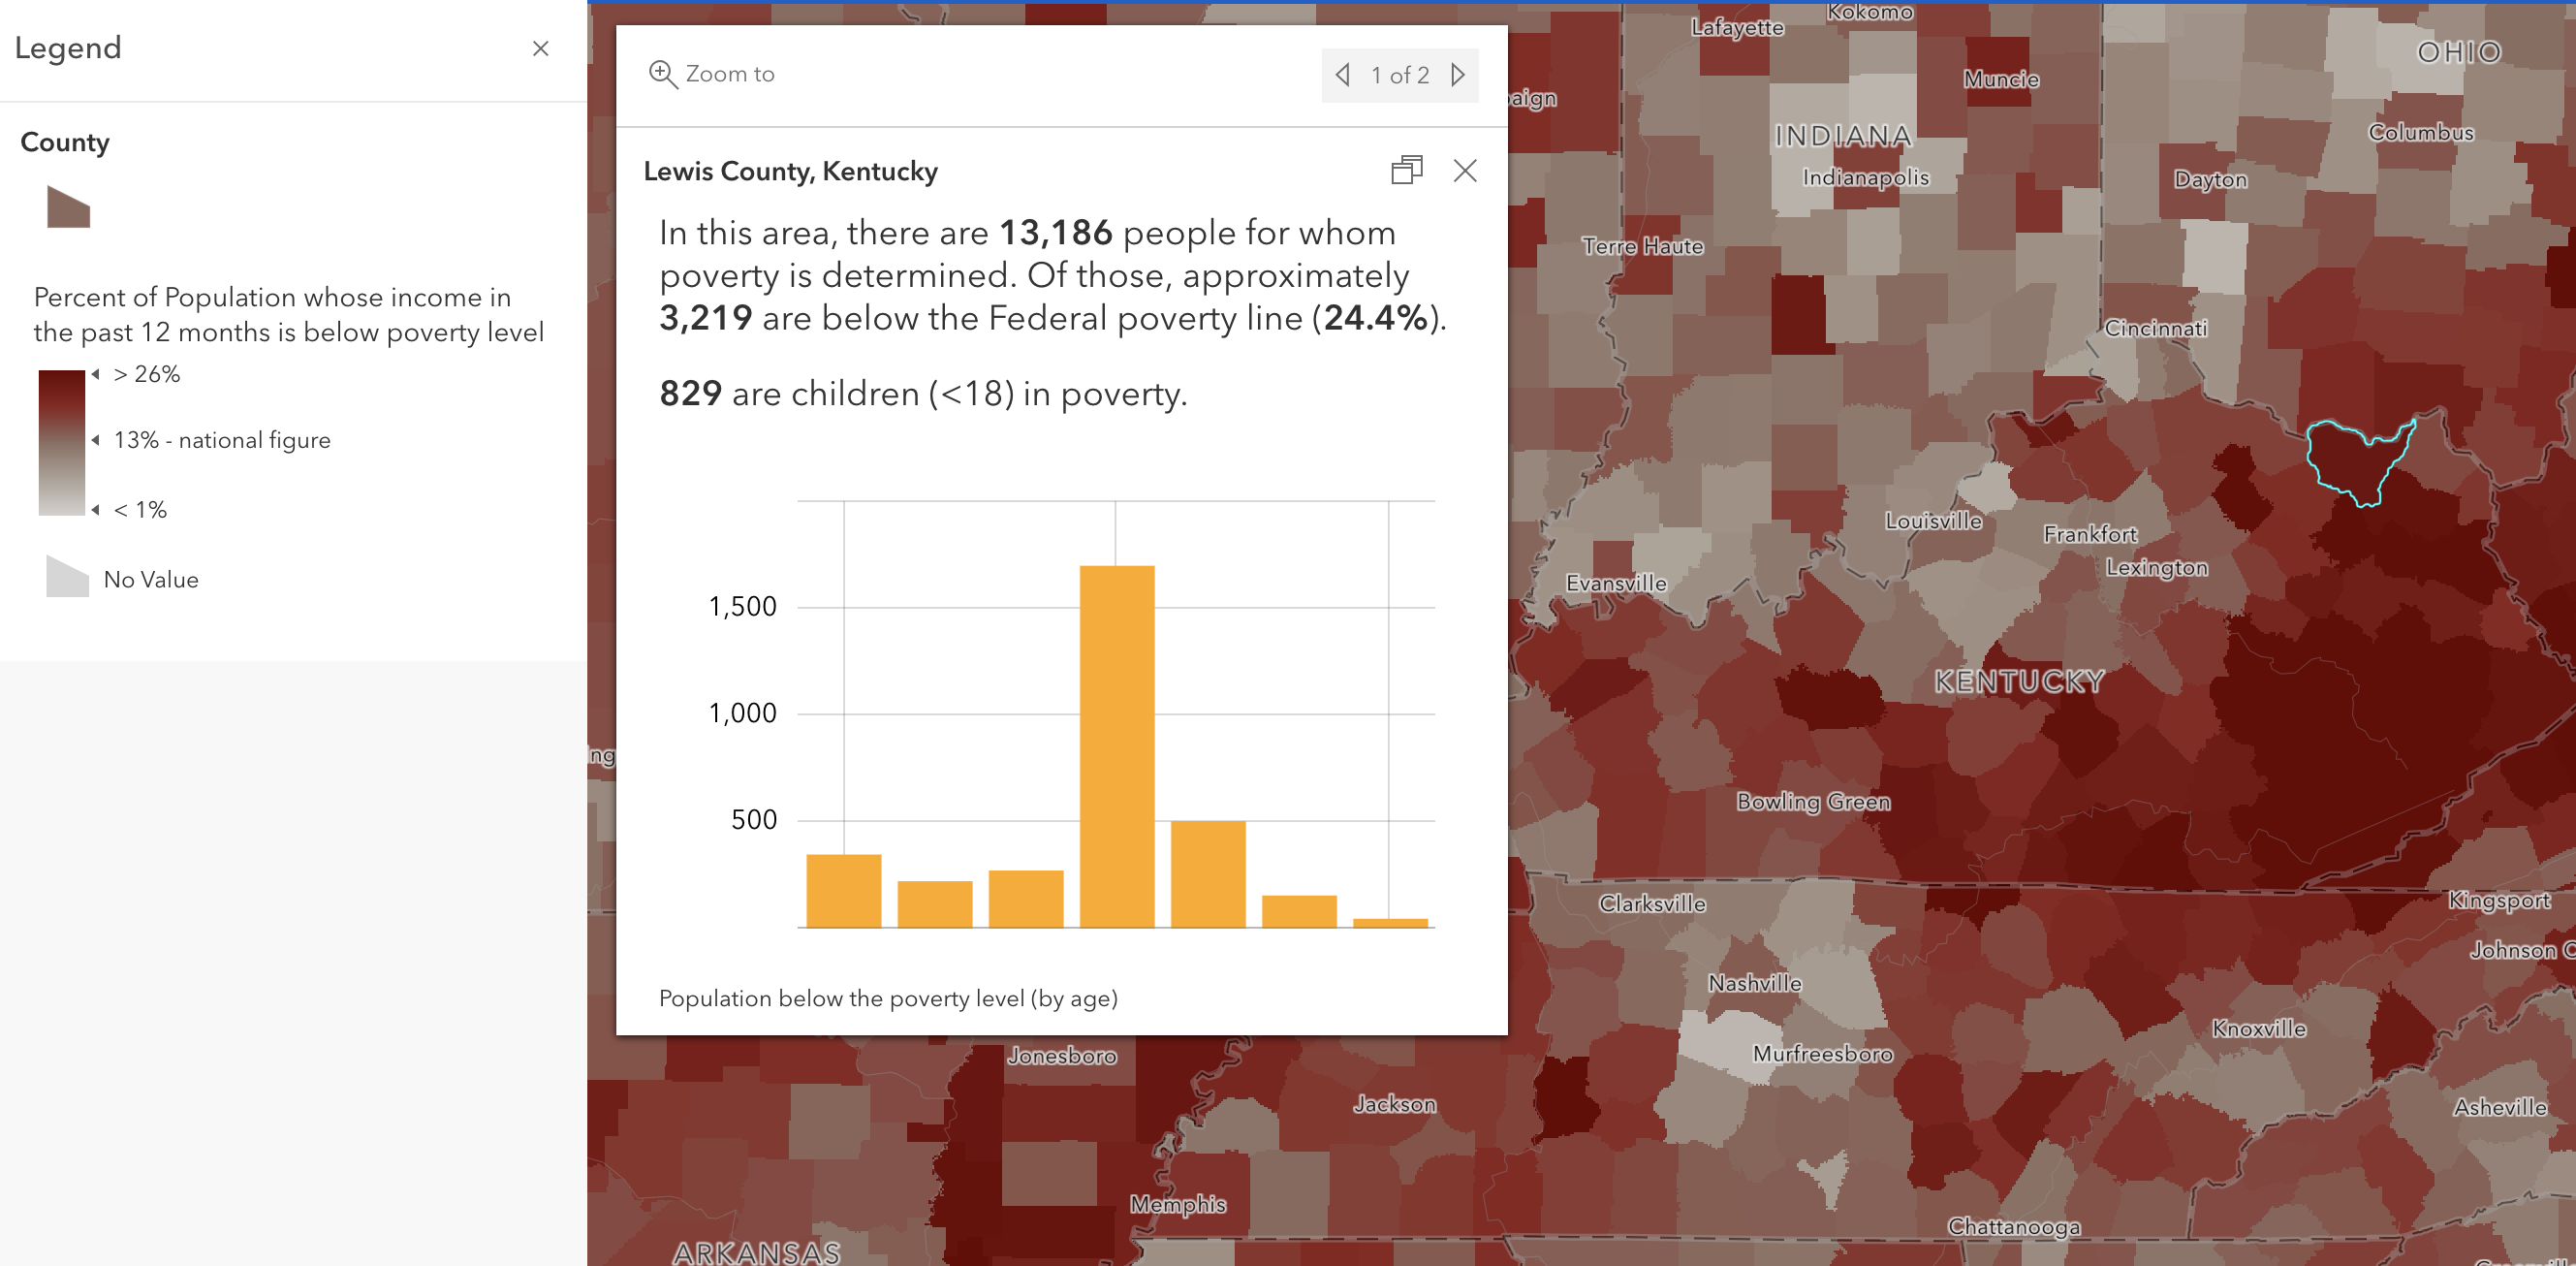 Population Living Below the Federal Poverty Level